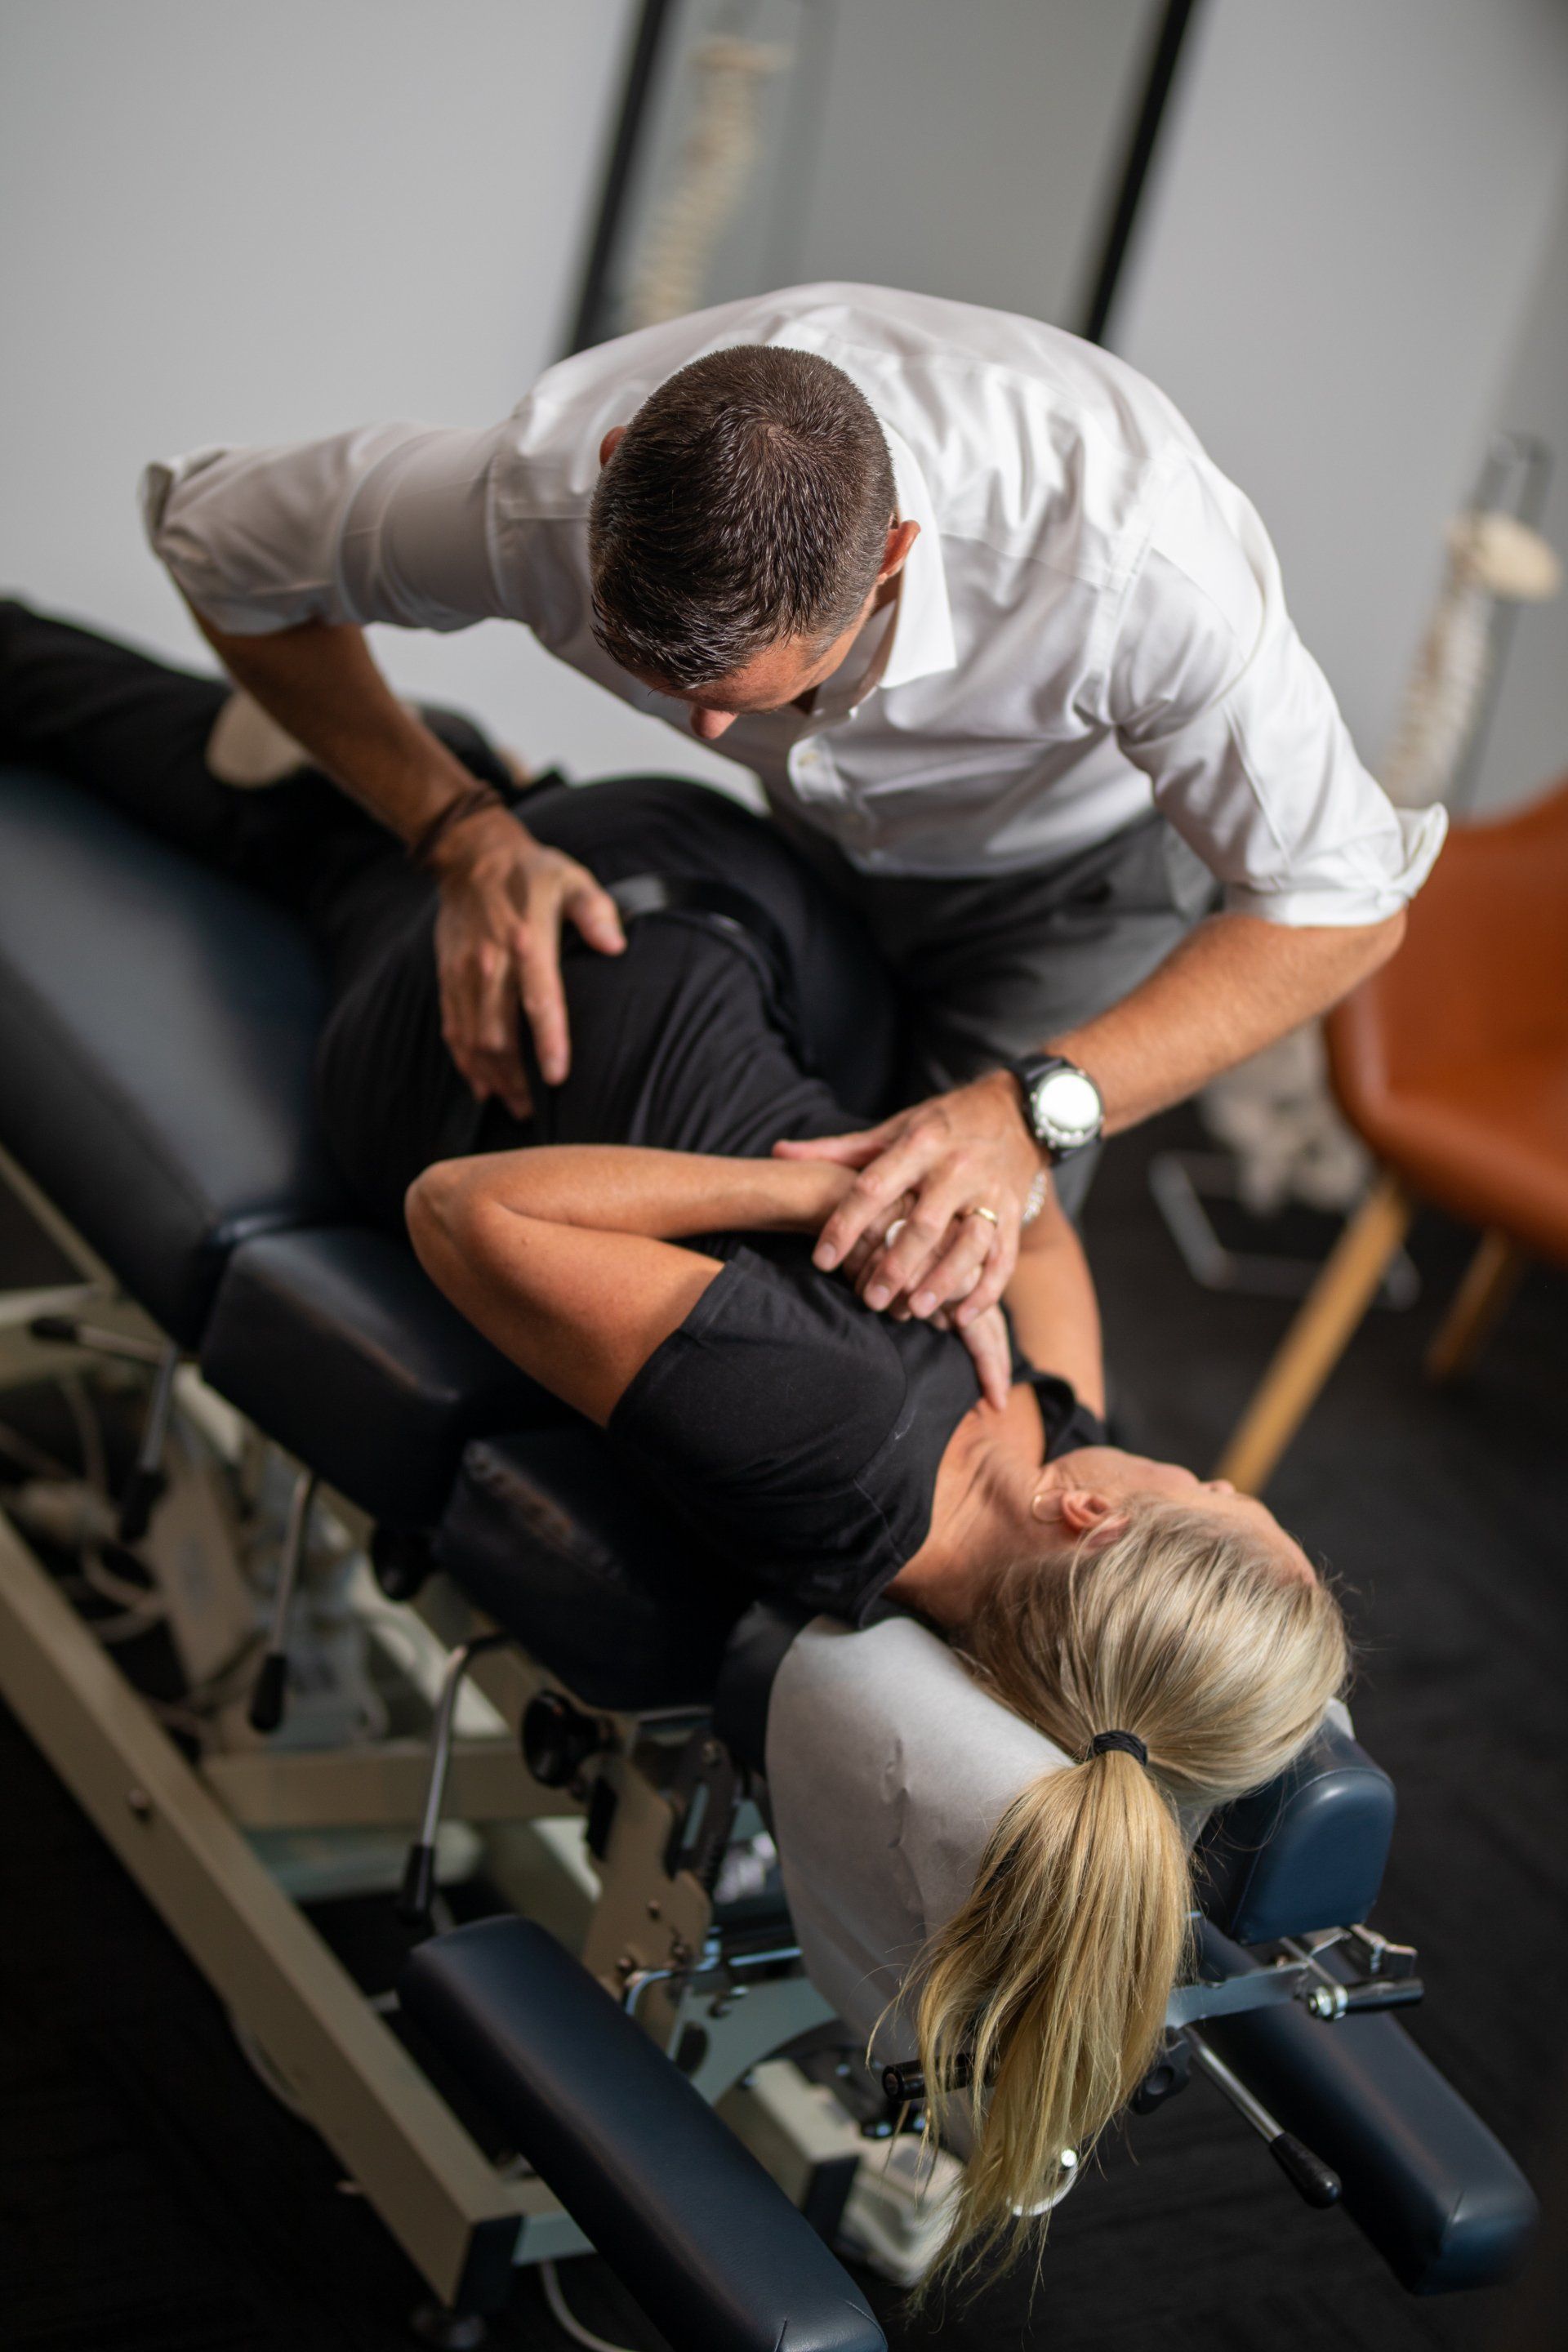 Chiropractor performing a spine adjustment